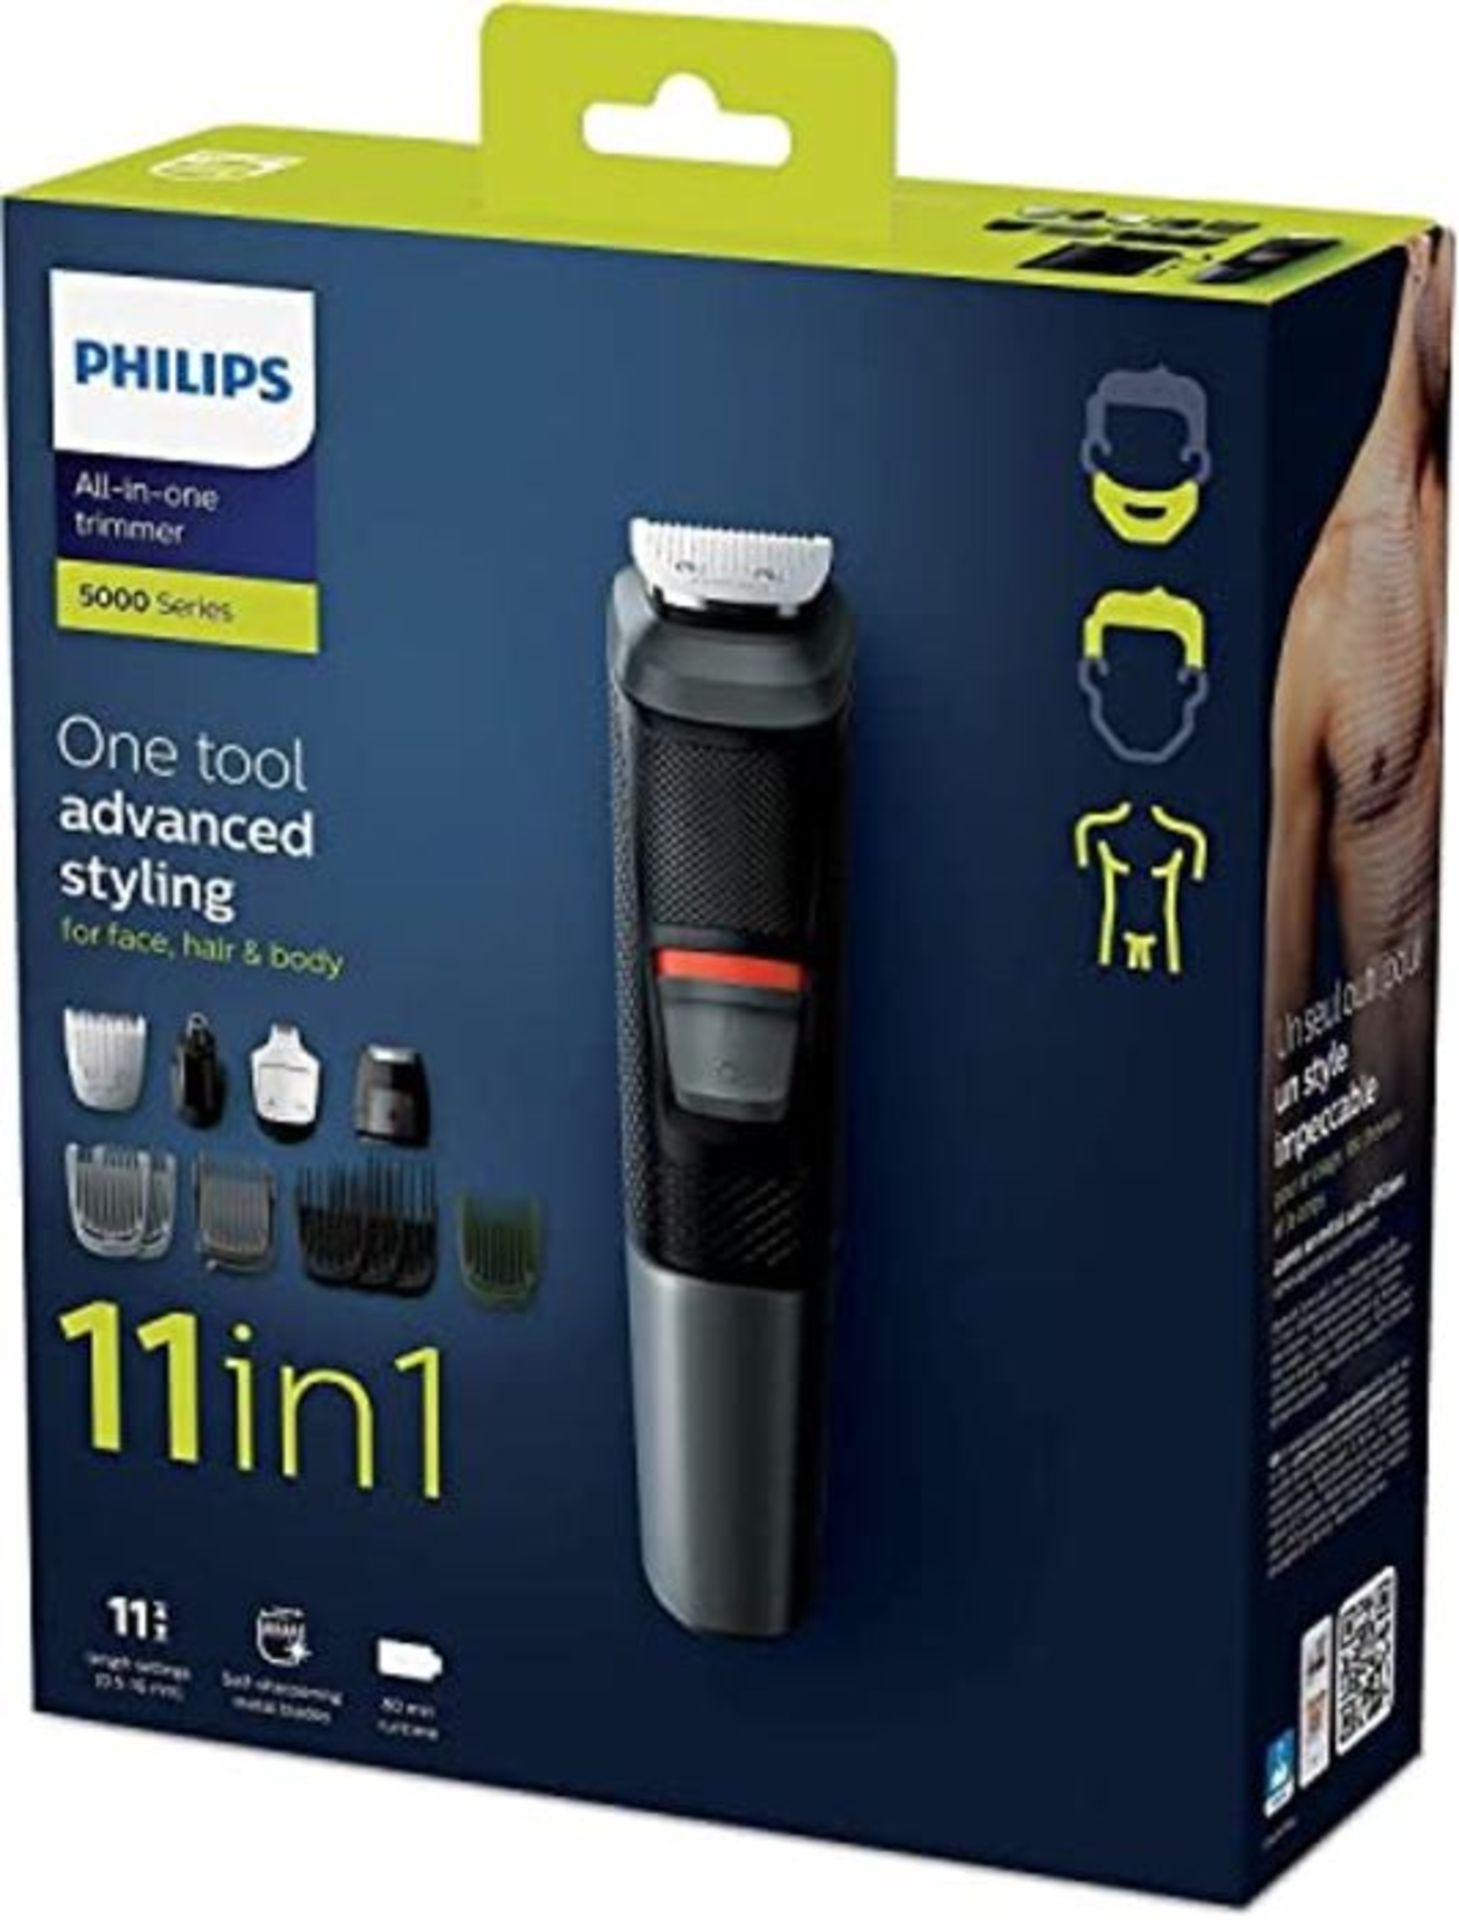 Philips 11-in-1 All-In-One Trimmer, Series 5000 Grooming Kit, Beard Trimmer, Hair Clip